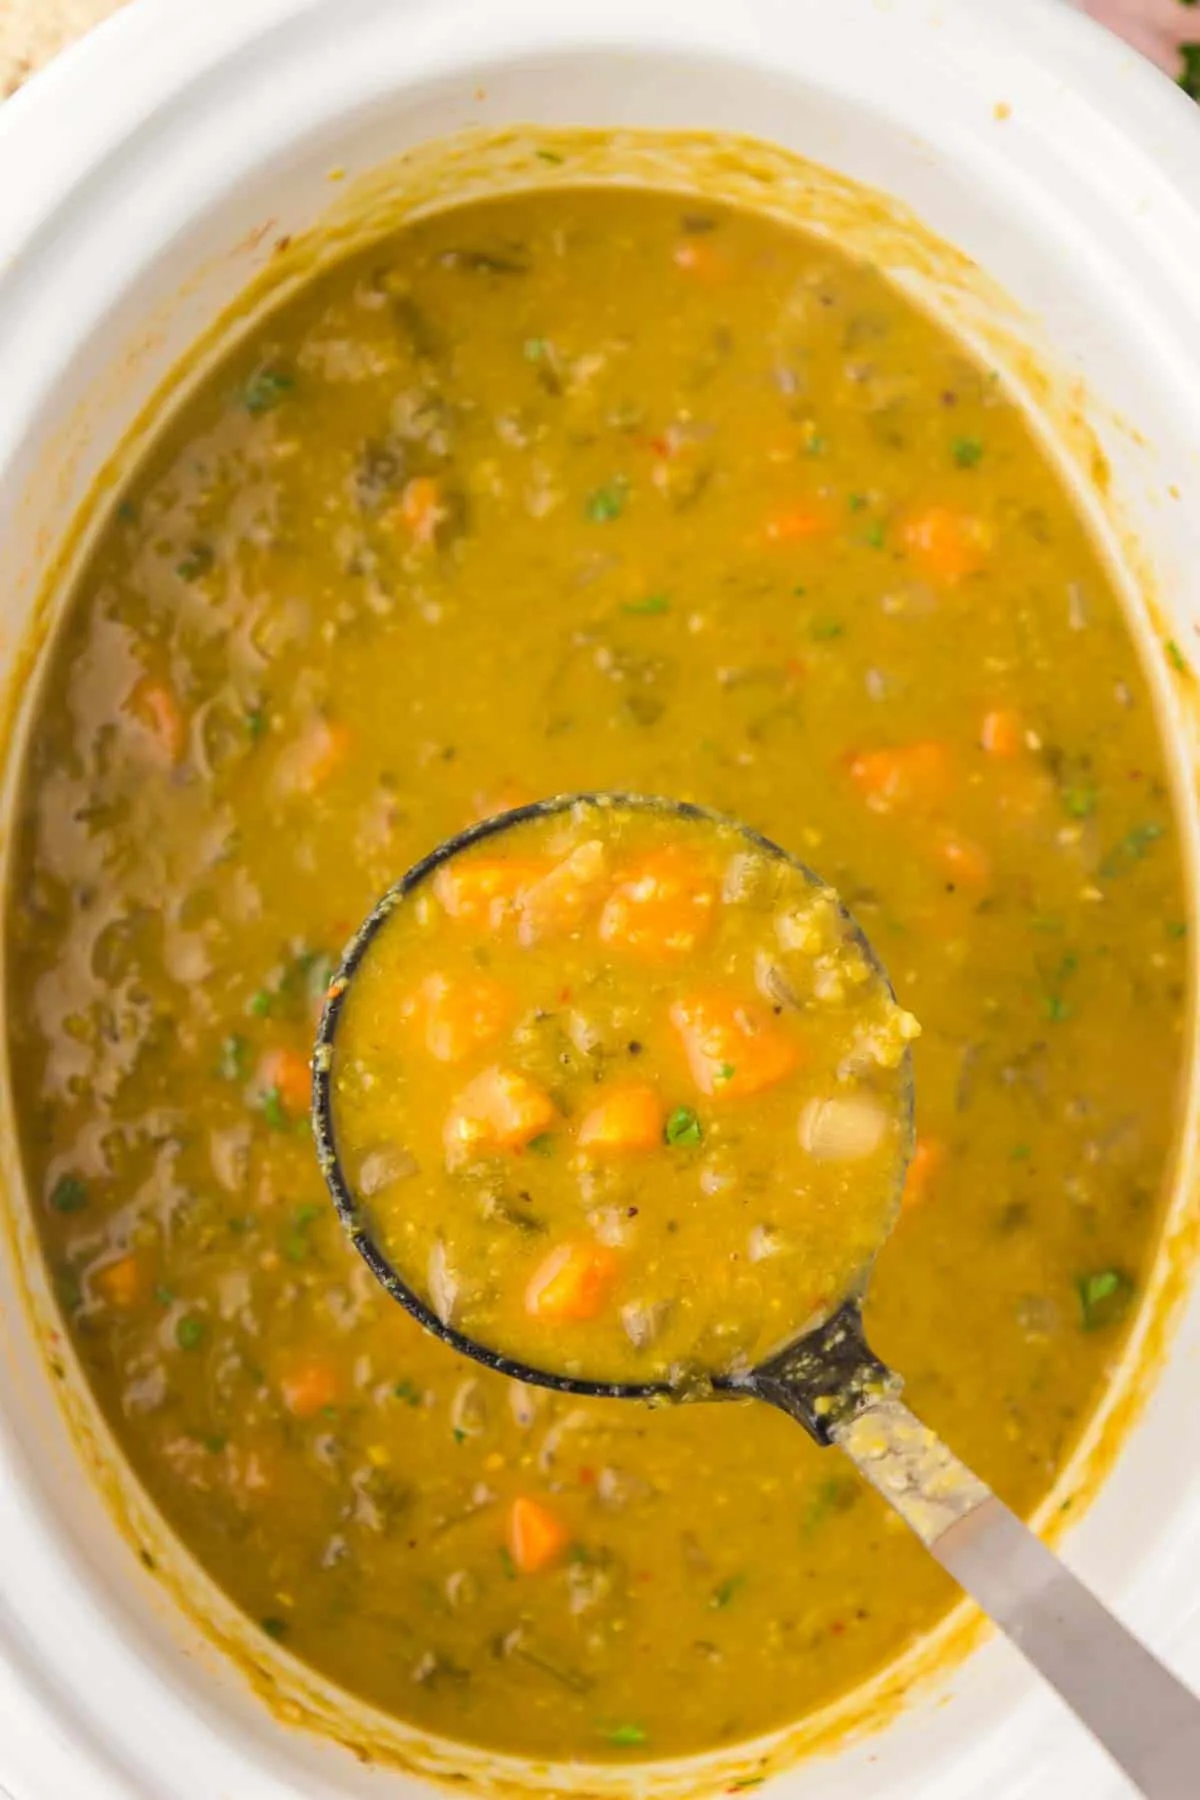 Crock Pot Split Pea Soup is a hearty slow cooker soup recipe made with split peas, carrots, celery, onions, vegetable broth and seasonings.